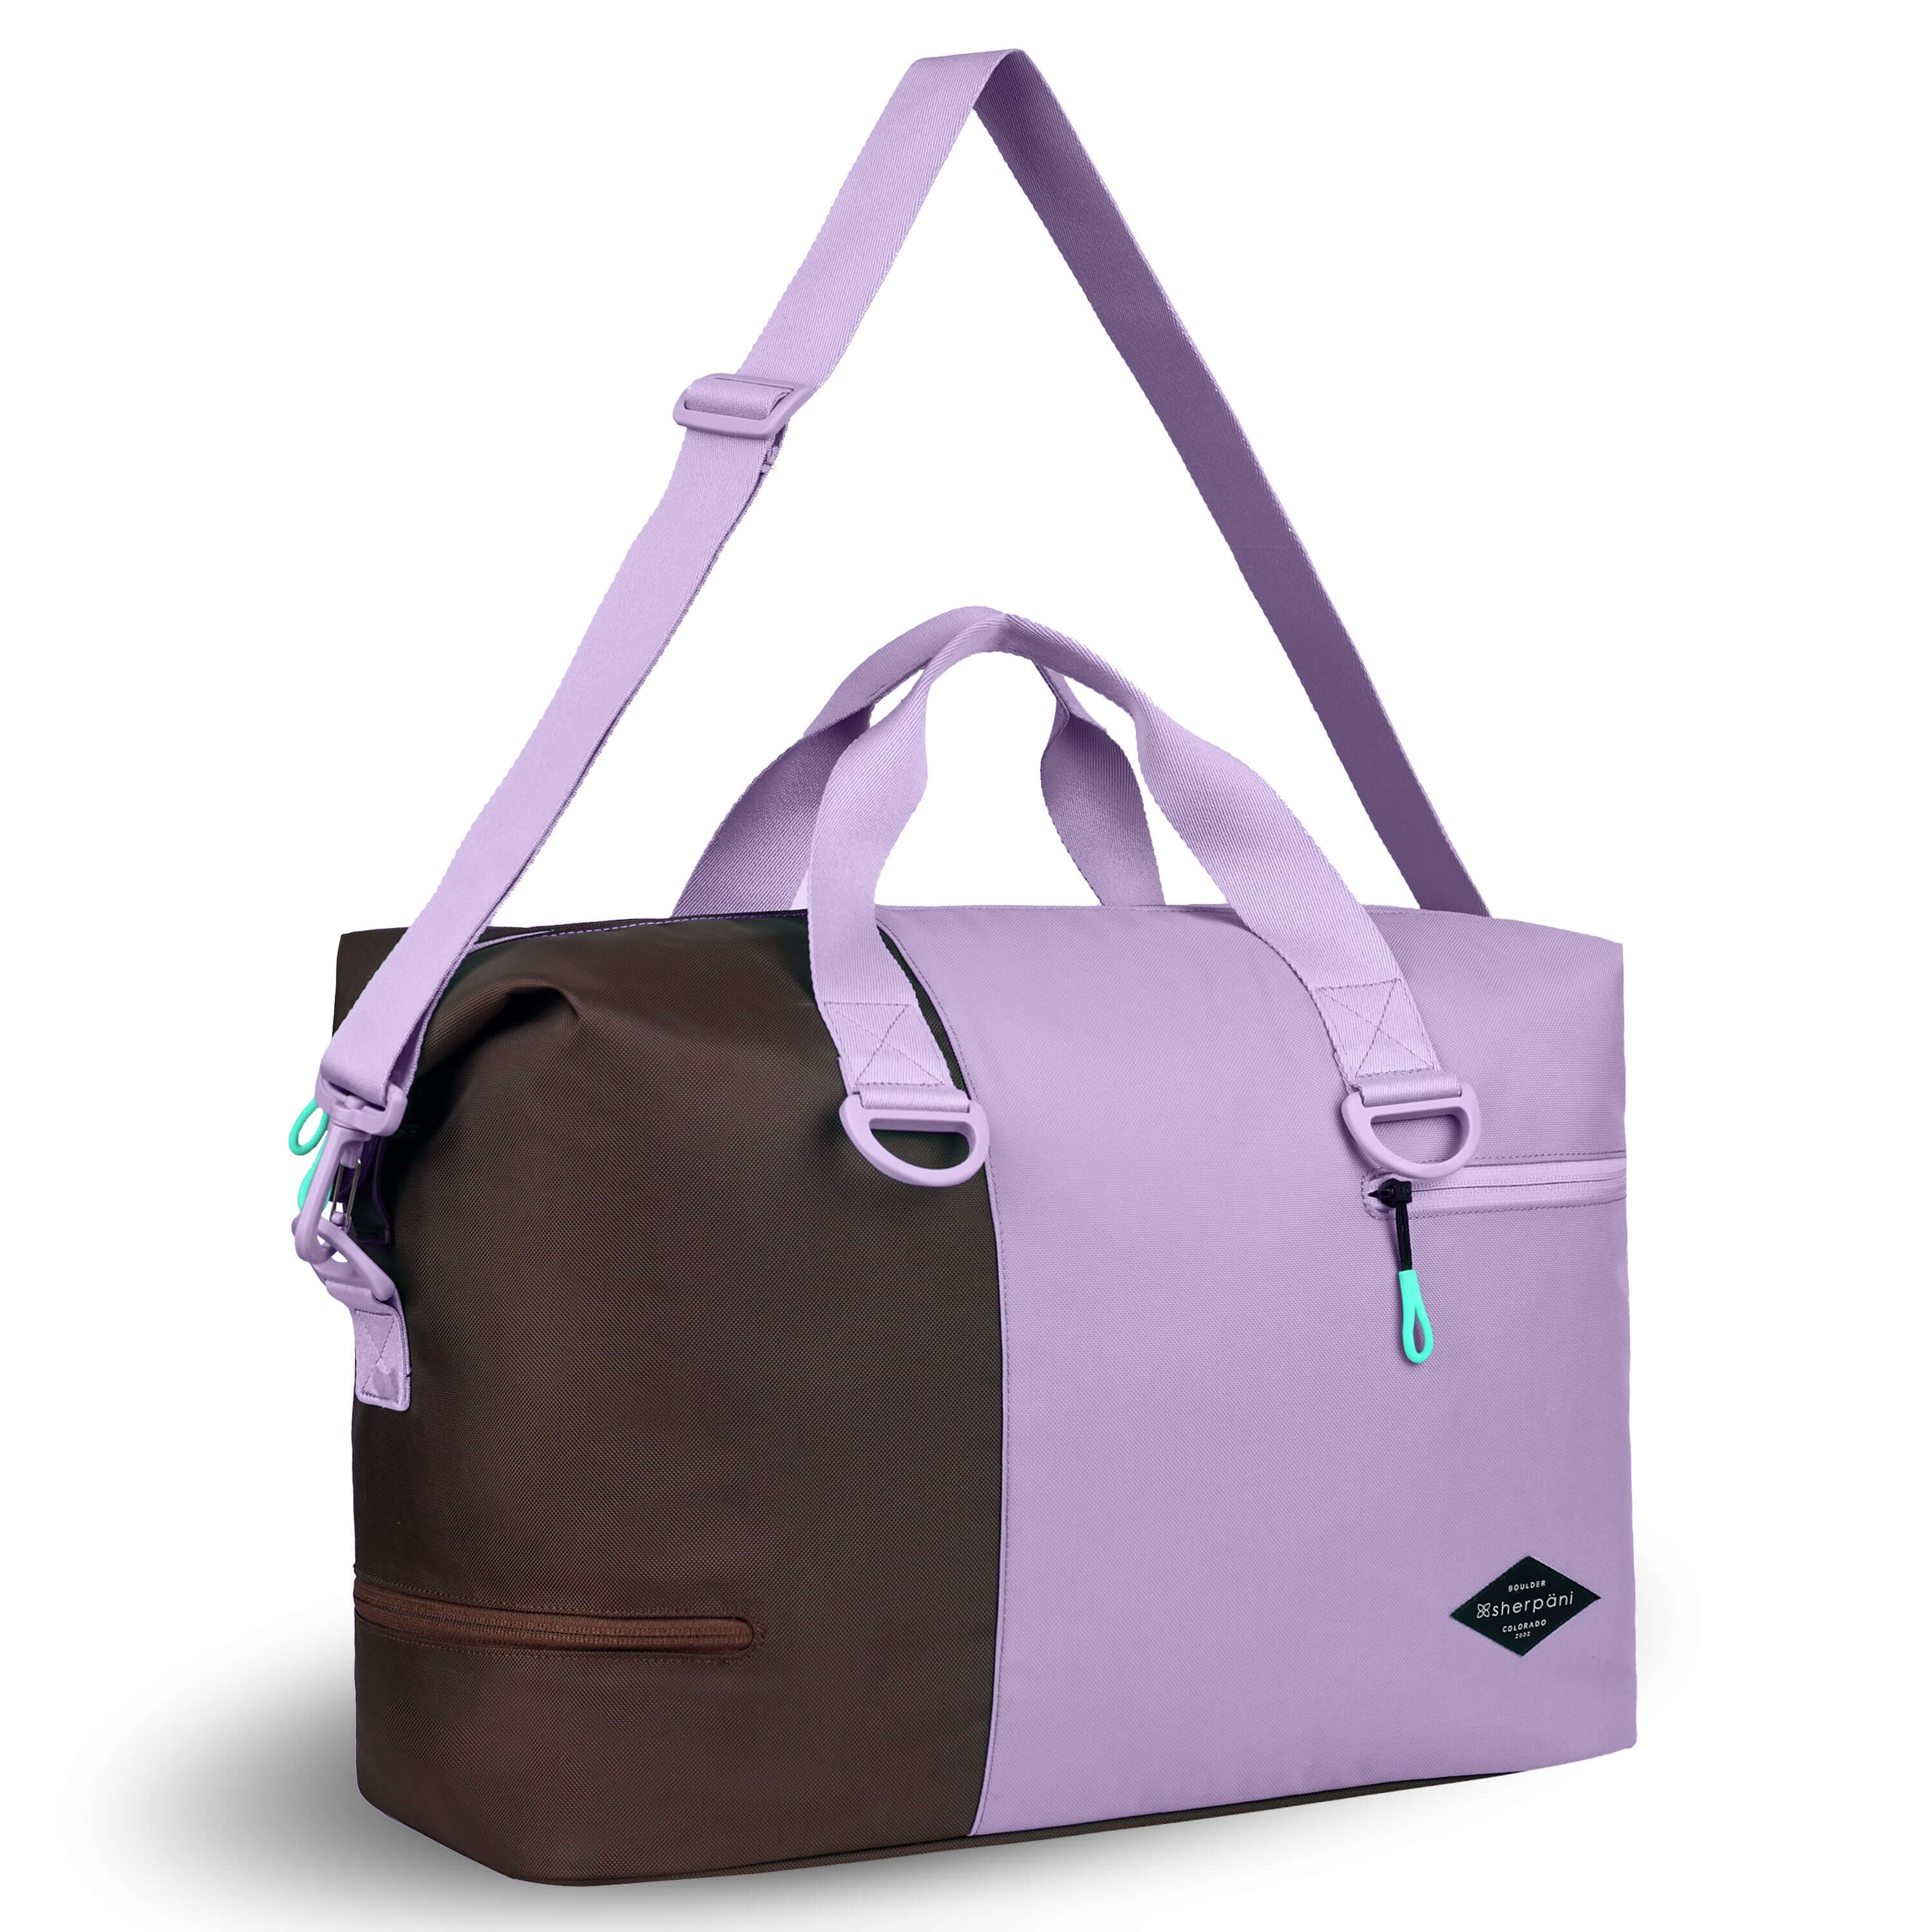 Angled front view of Sherpani bag, the Sola in Lavender. The bag is two-toned in lavender and brown. Two external zipper compartments are visible on the top right and bottom left of the bag. Easy-pull zippers are accented in aqua. The bag has tote handles and an adjustable/detachable crossbody strap.